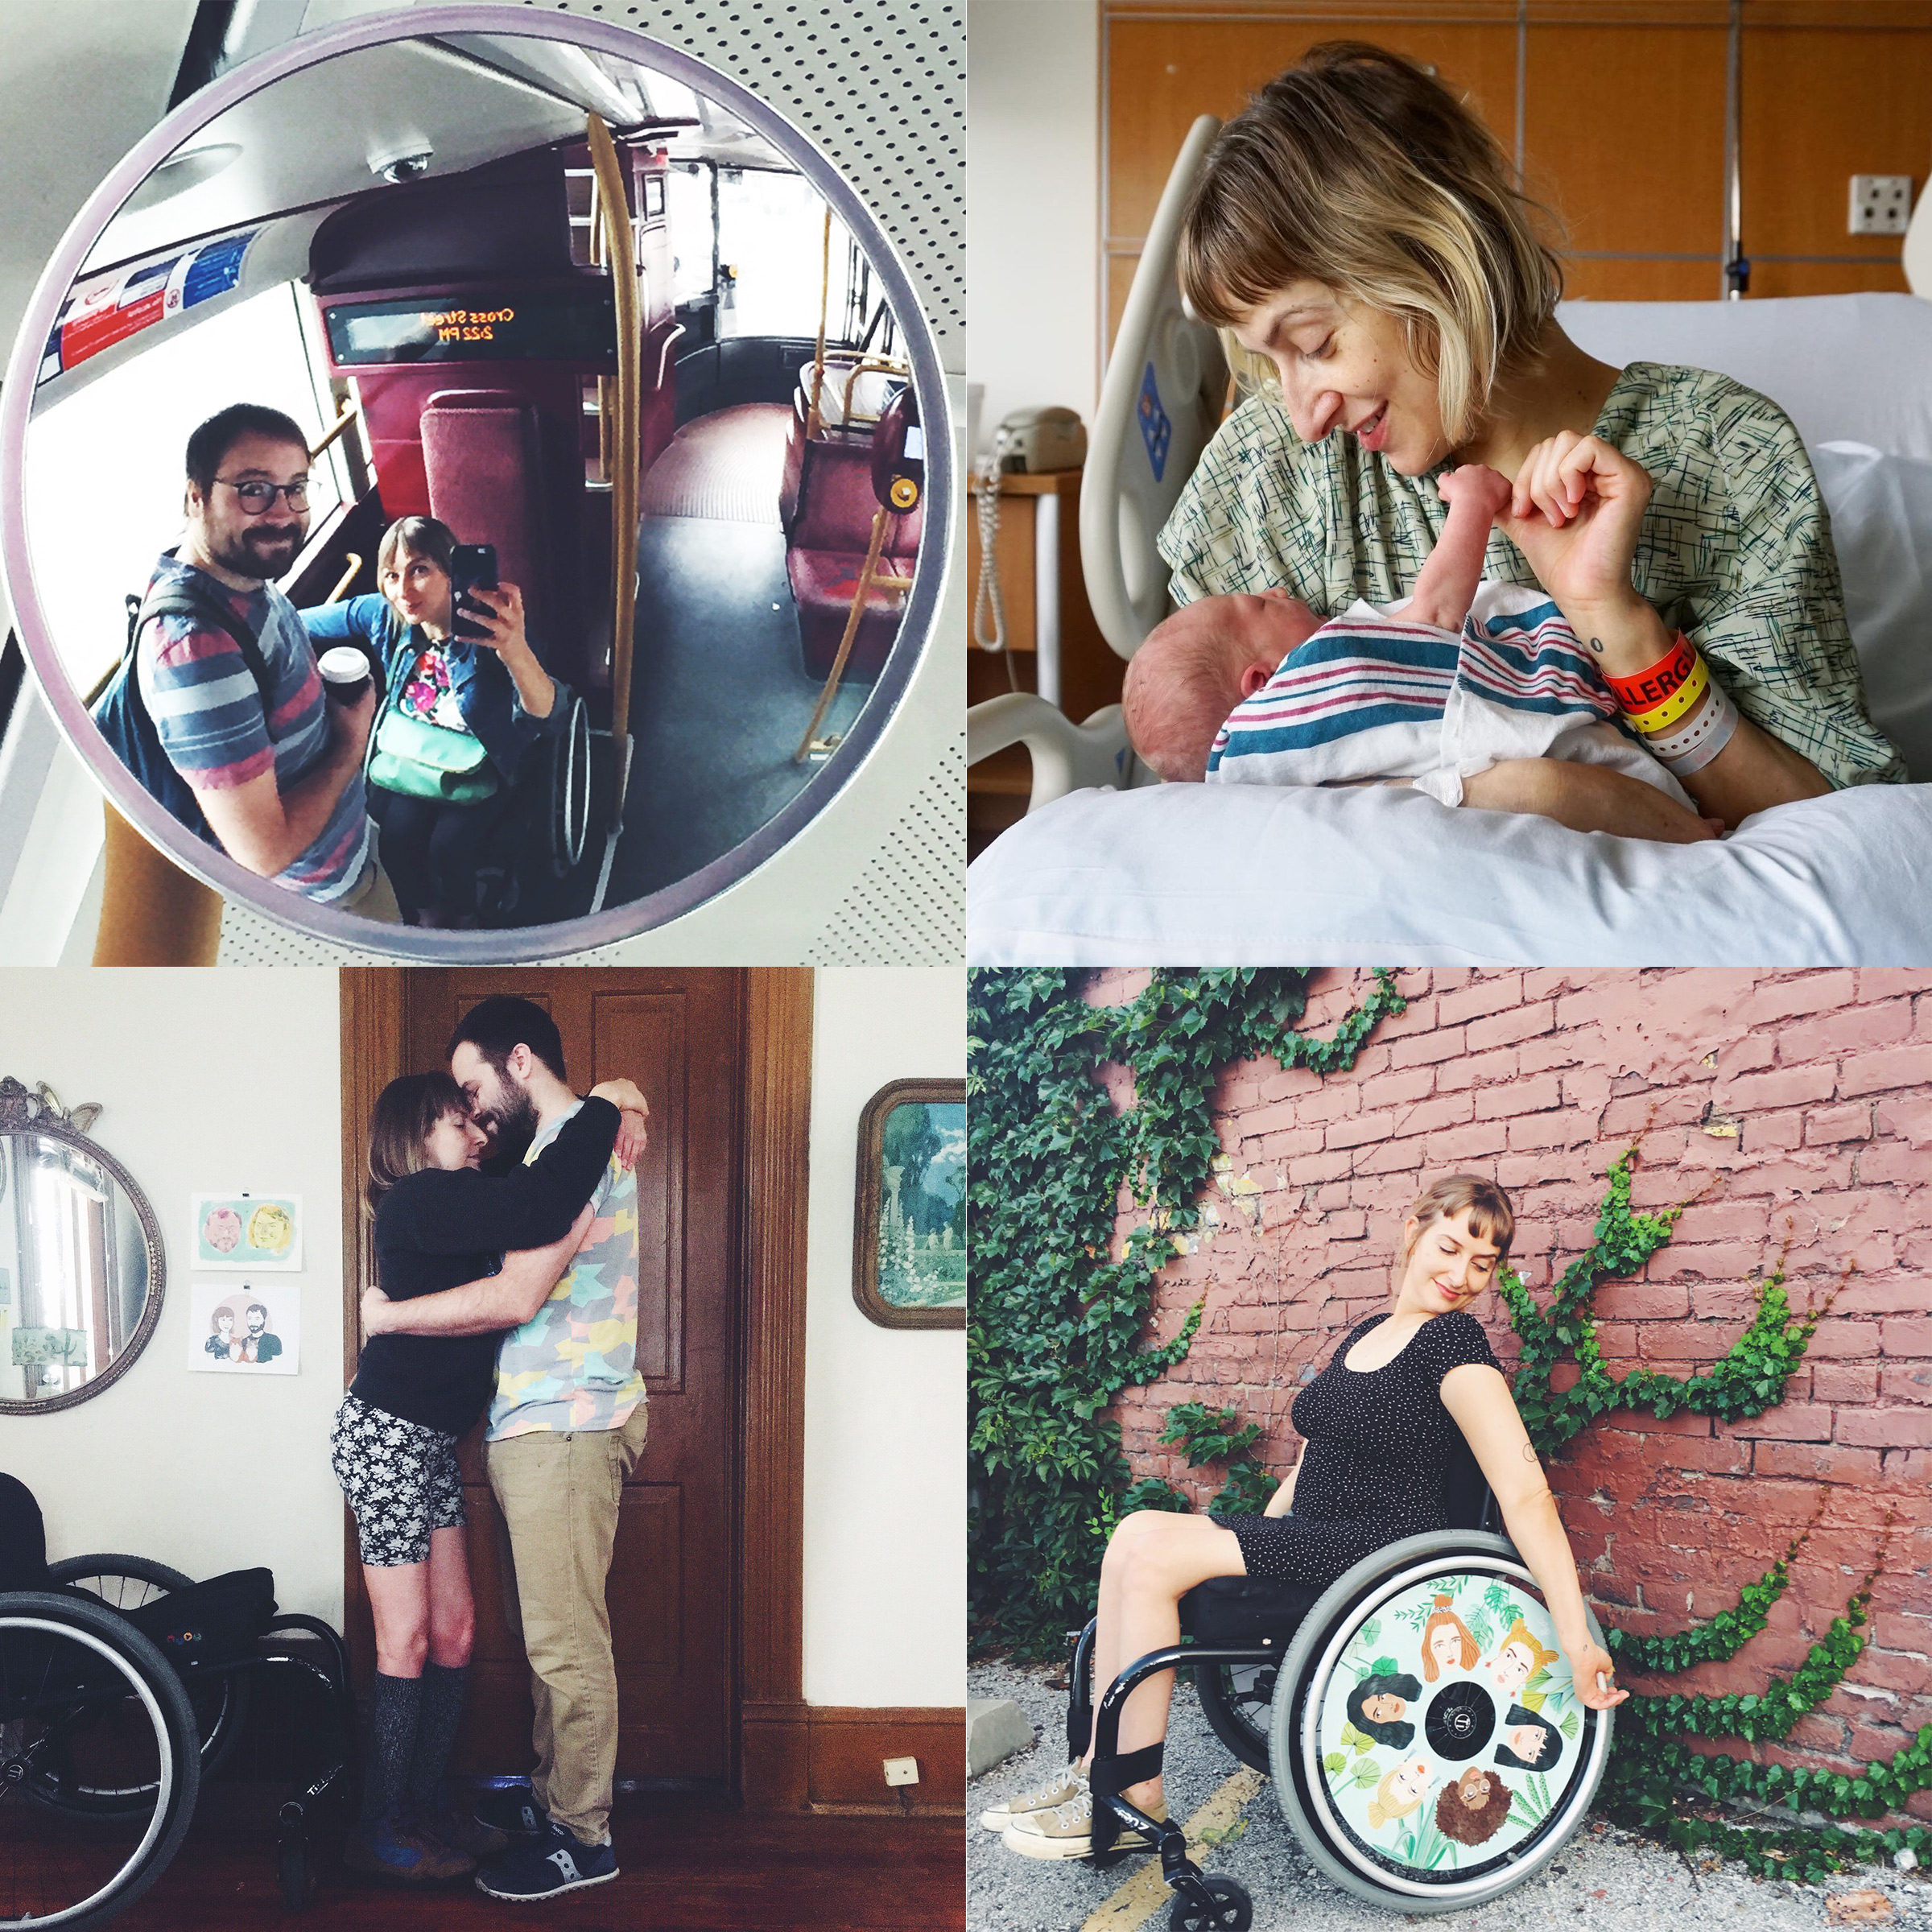 Taussig shares photos and “mini memoirs” narrating her life, which includes her husband Micah and new baby Otto, on Instagram (Courtesy the author)